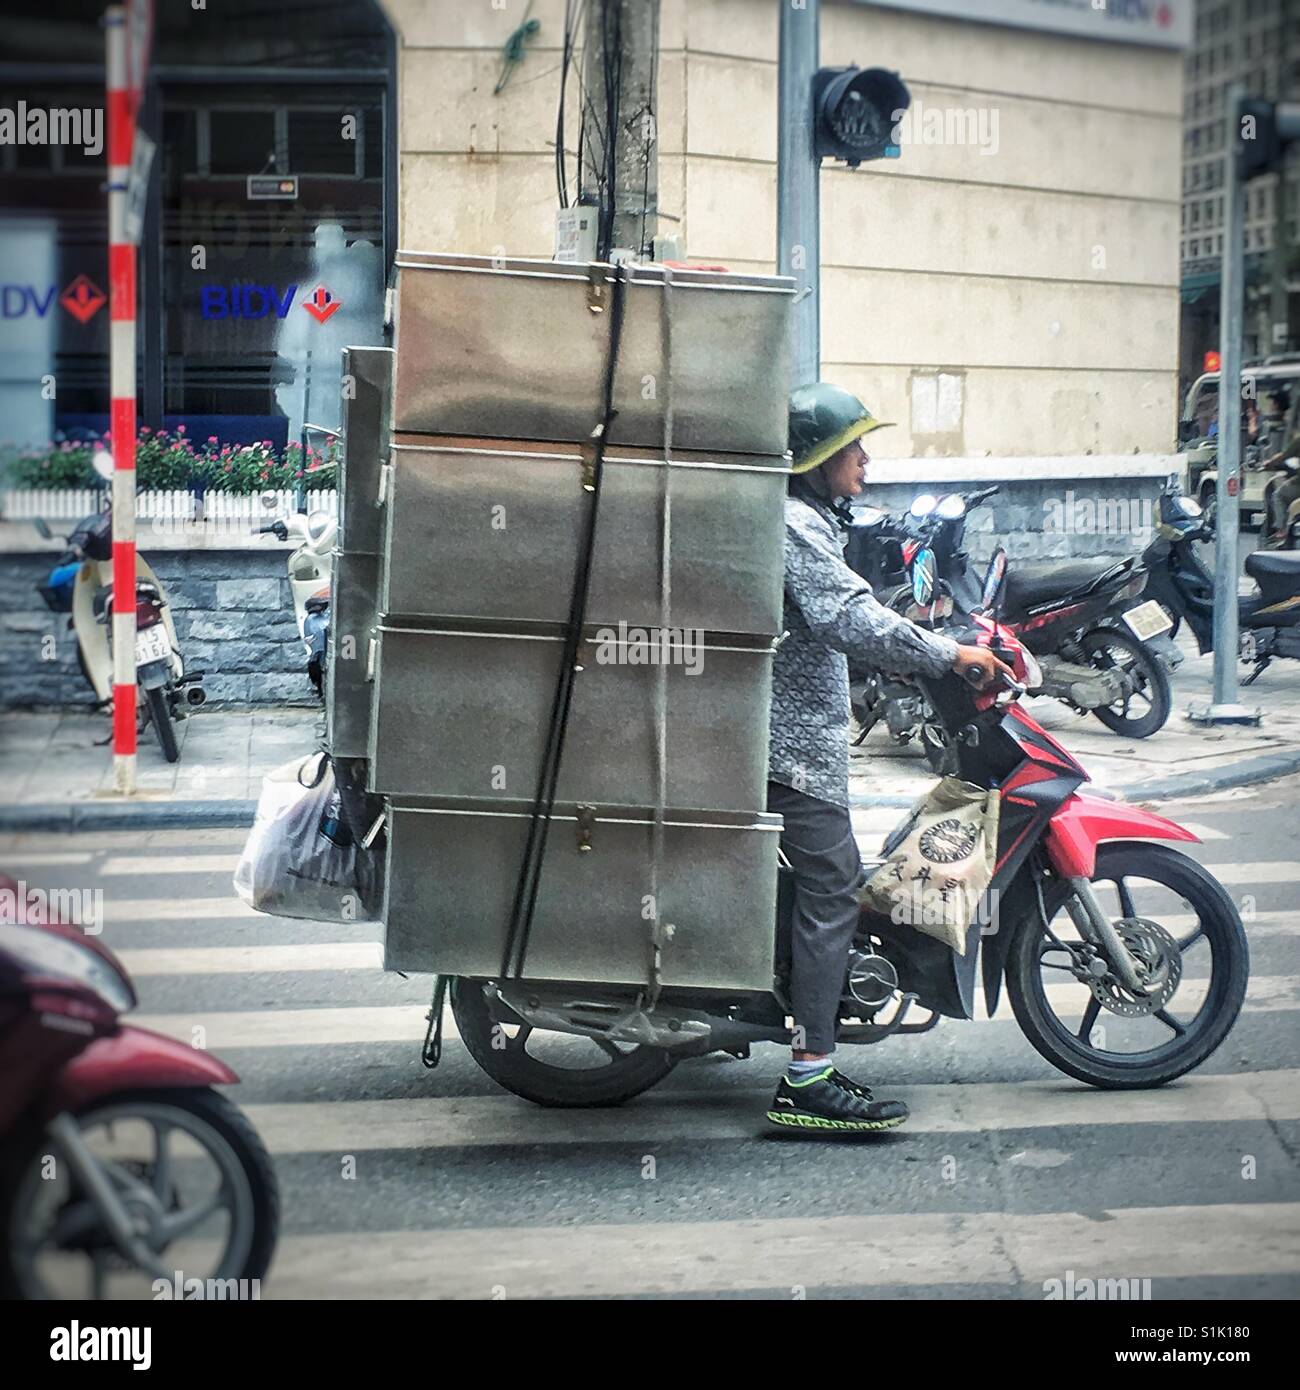 Vietnamese man on moped carrying an oversize load of metal boxes on a city street Stock Photo